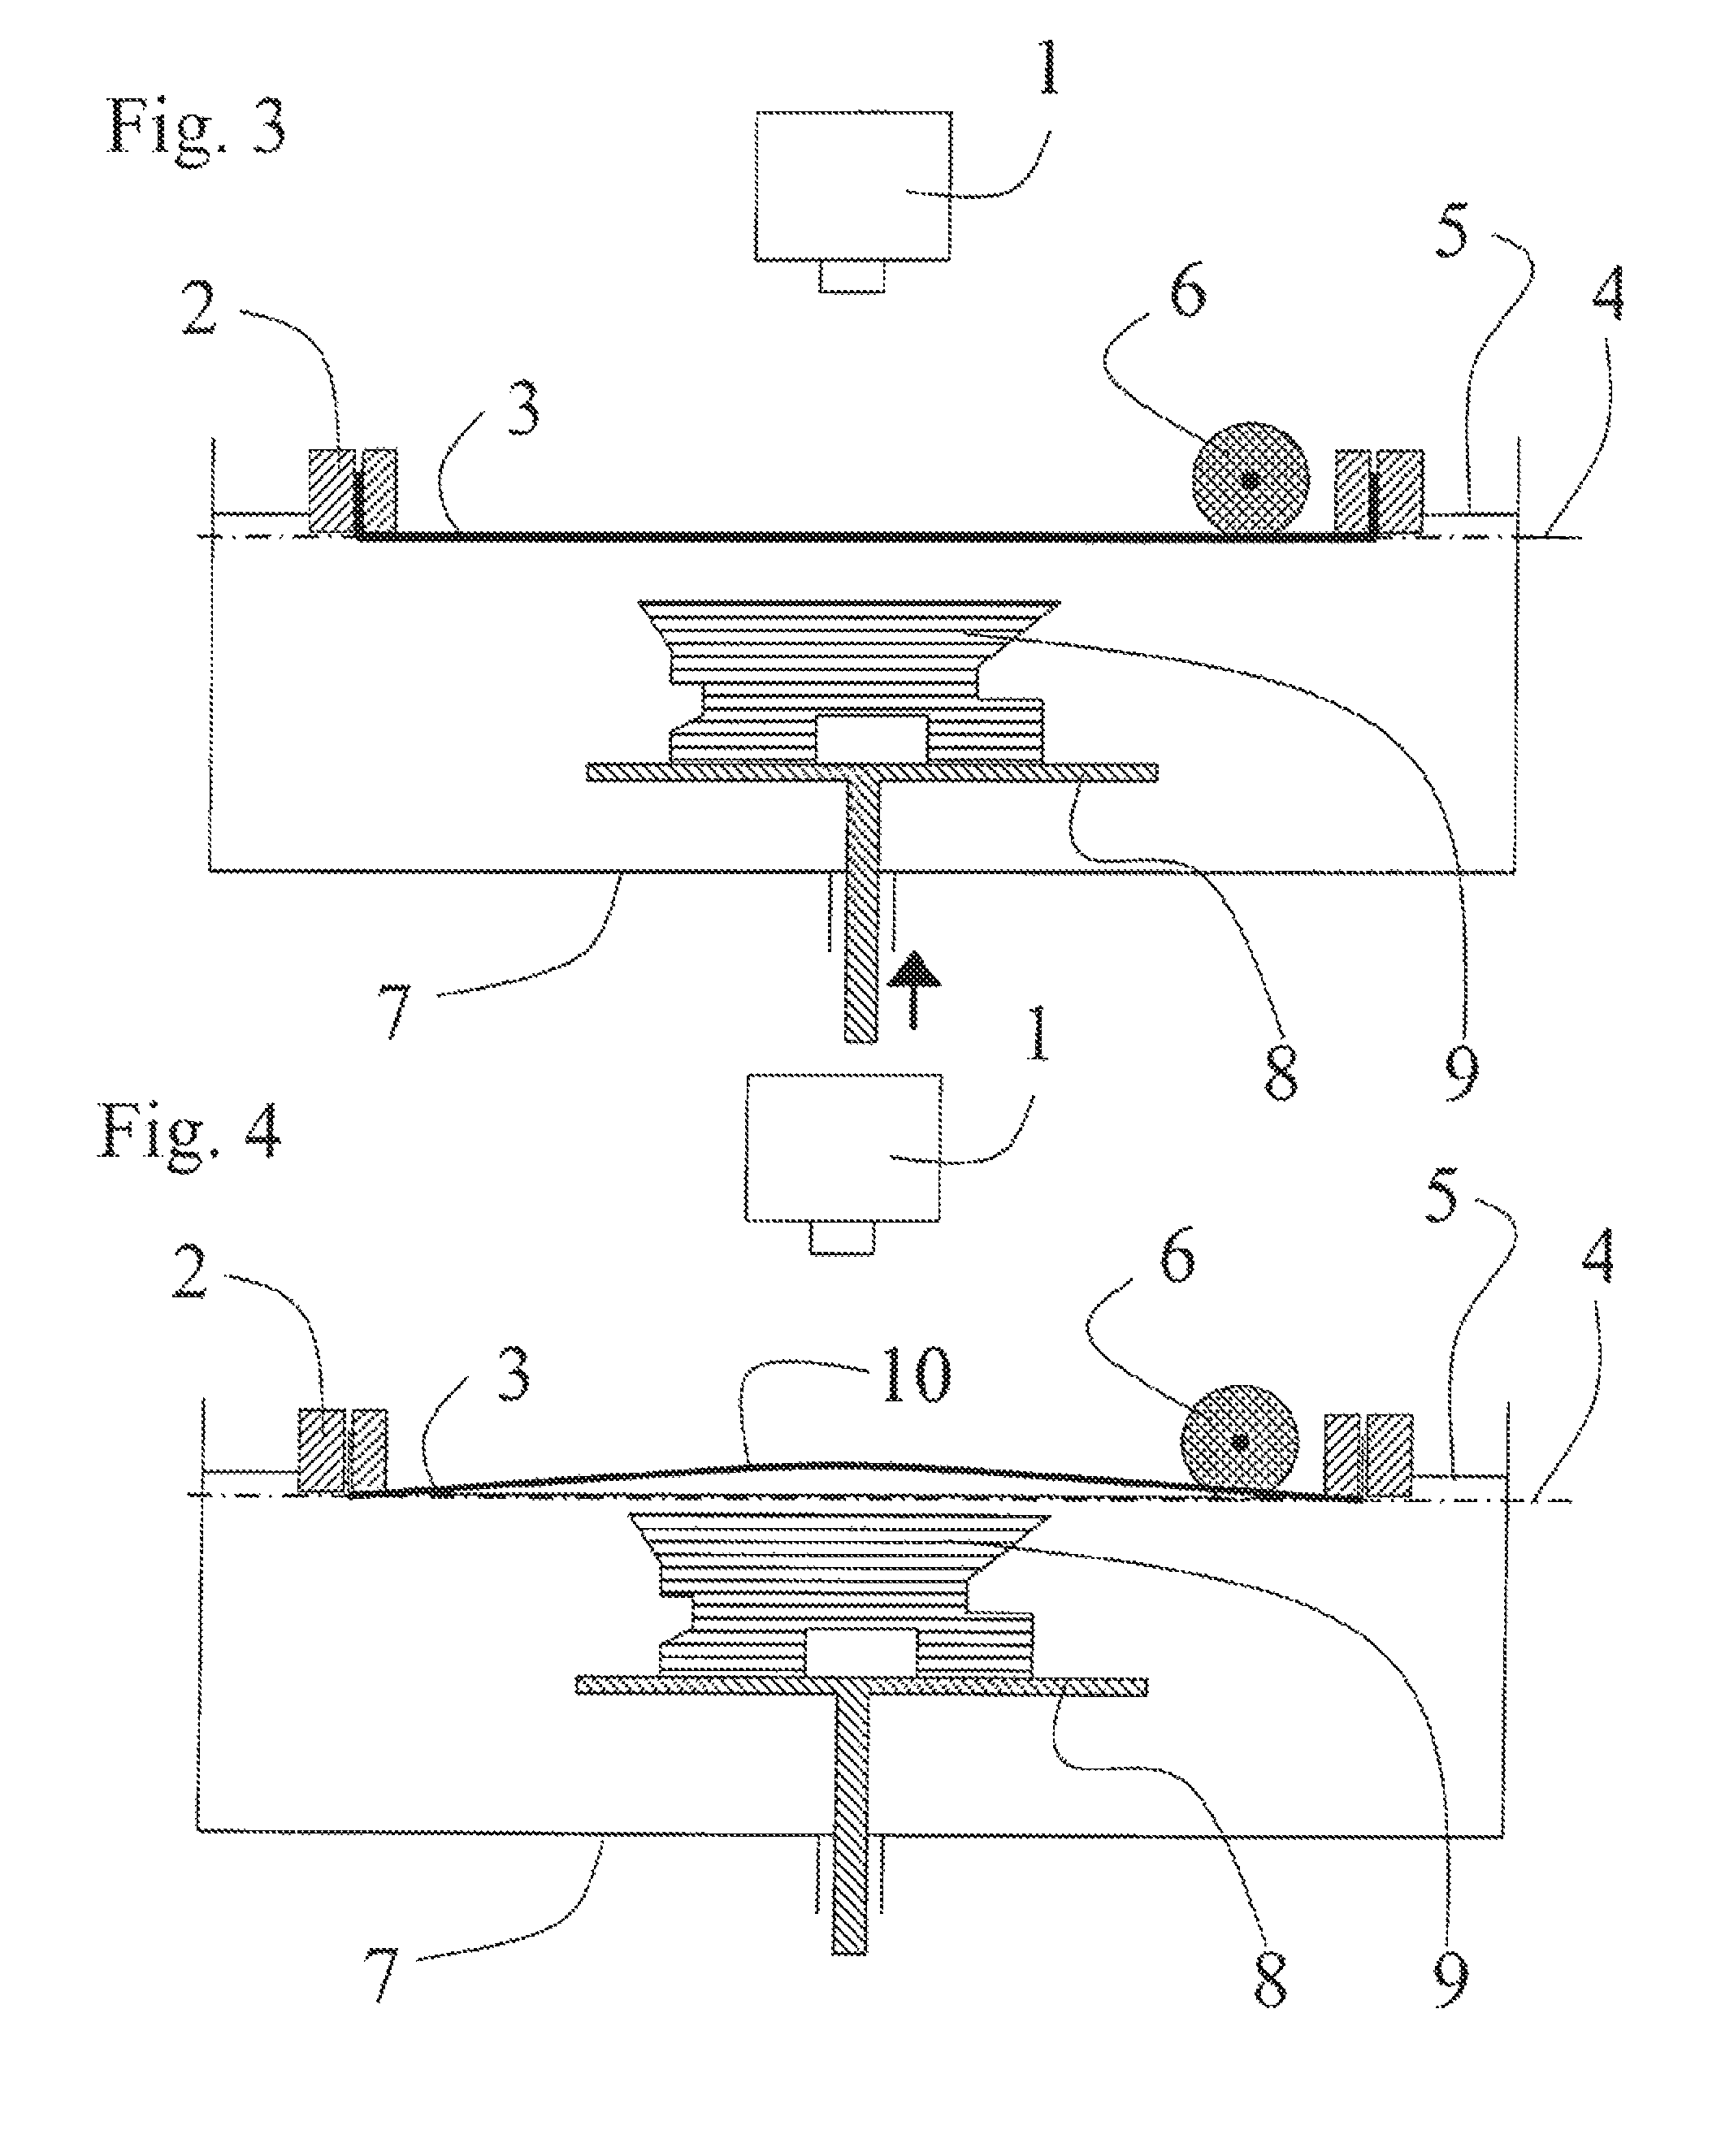 Process for the production of a three-dimensional object with an improved separation of hardened material layers from a construction plane